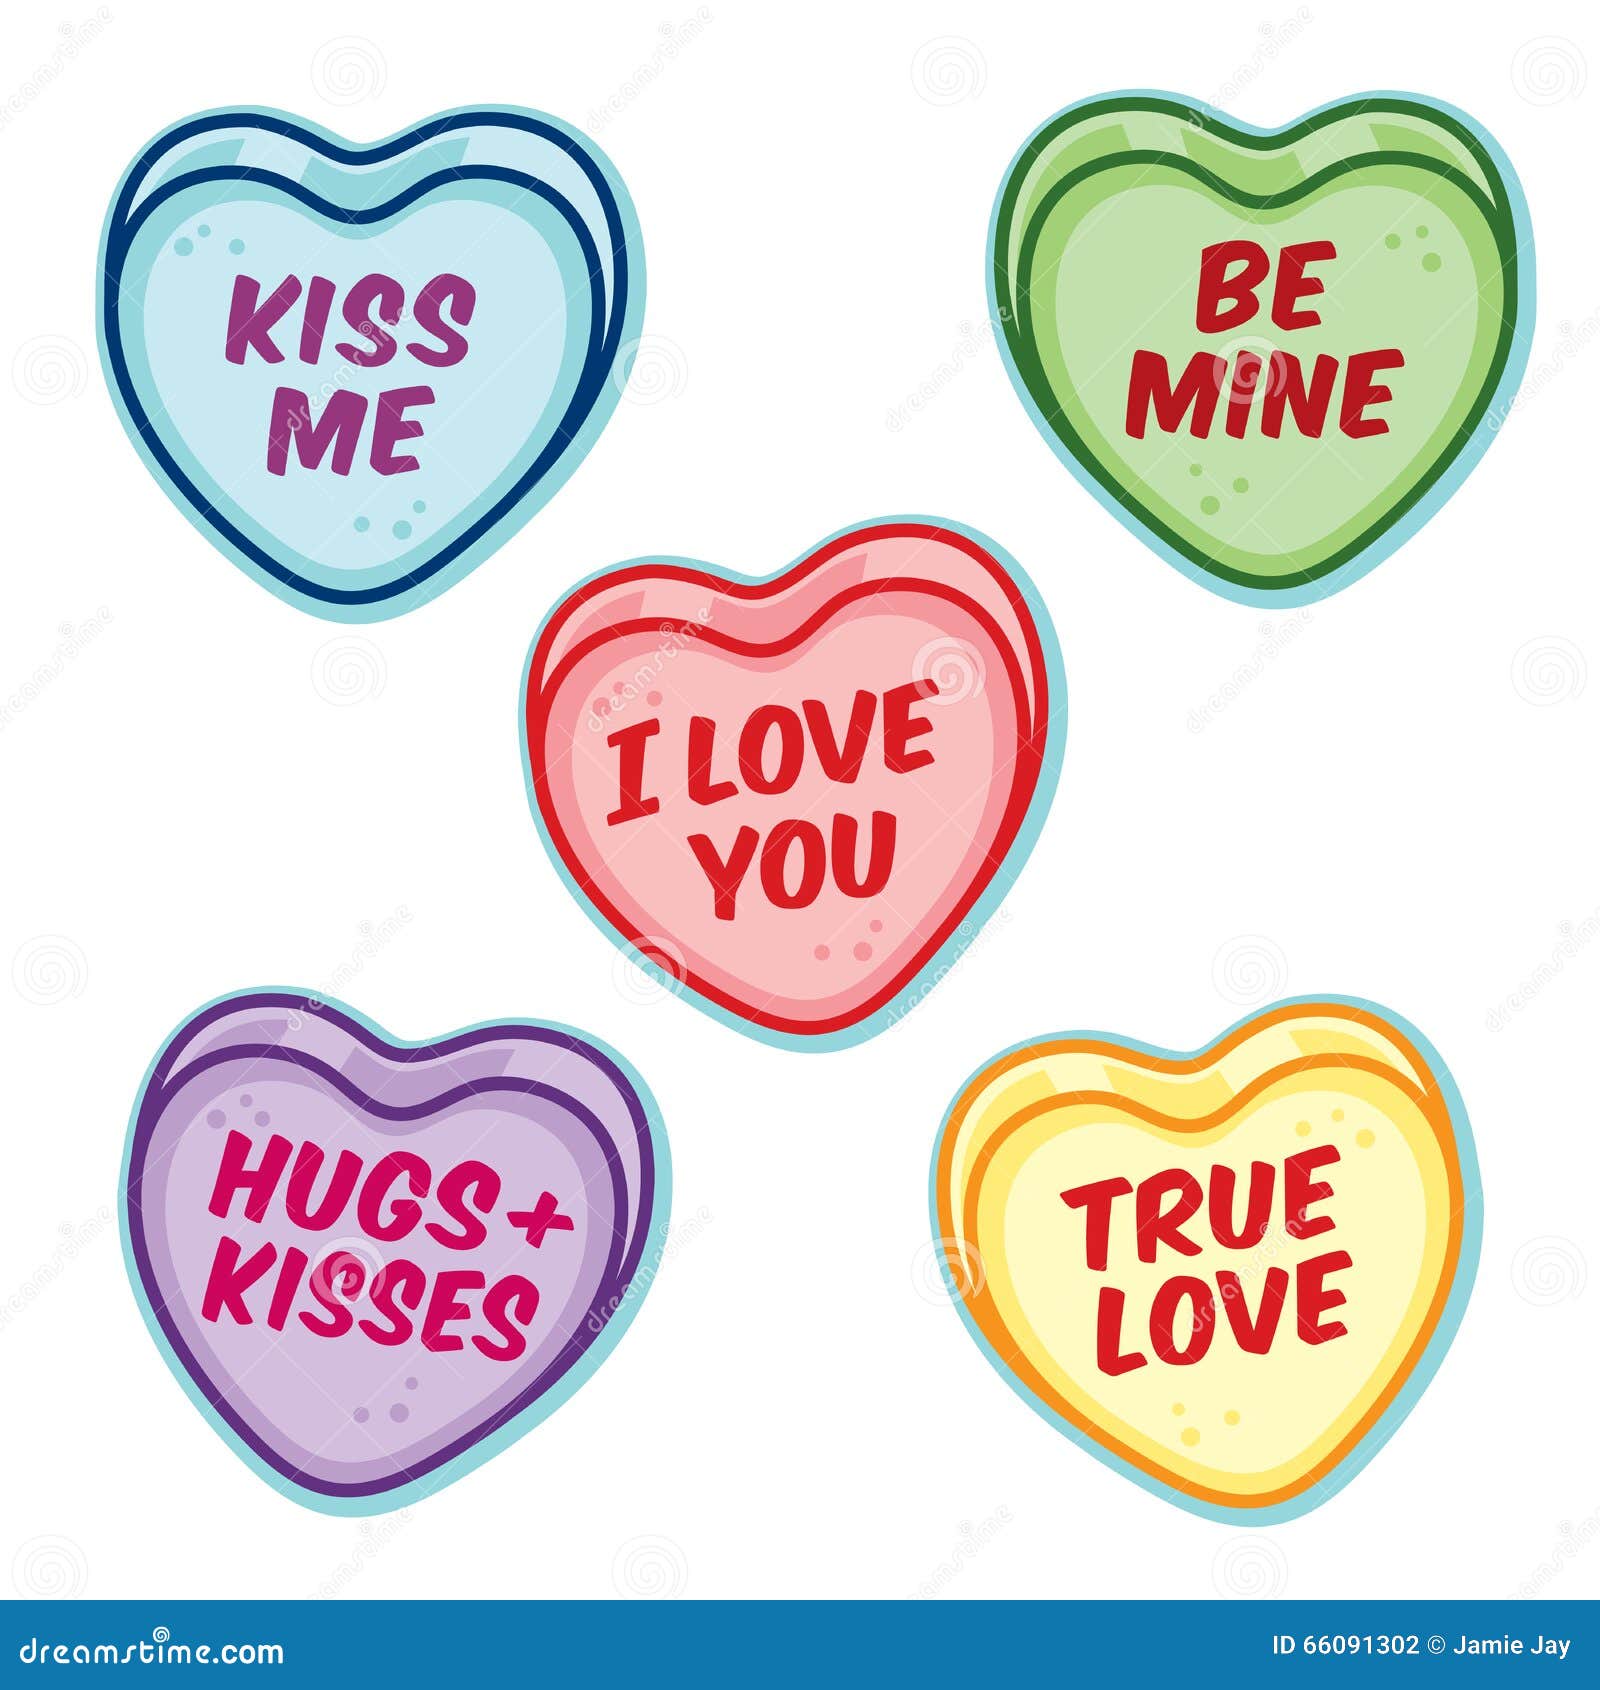 valentine candy hearts with word sayings